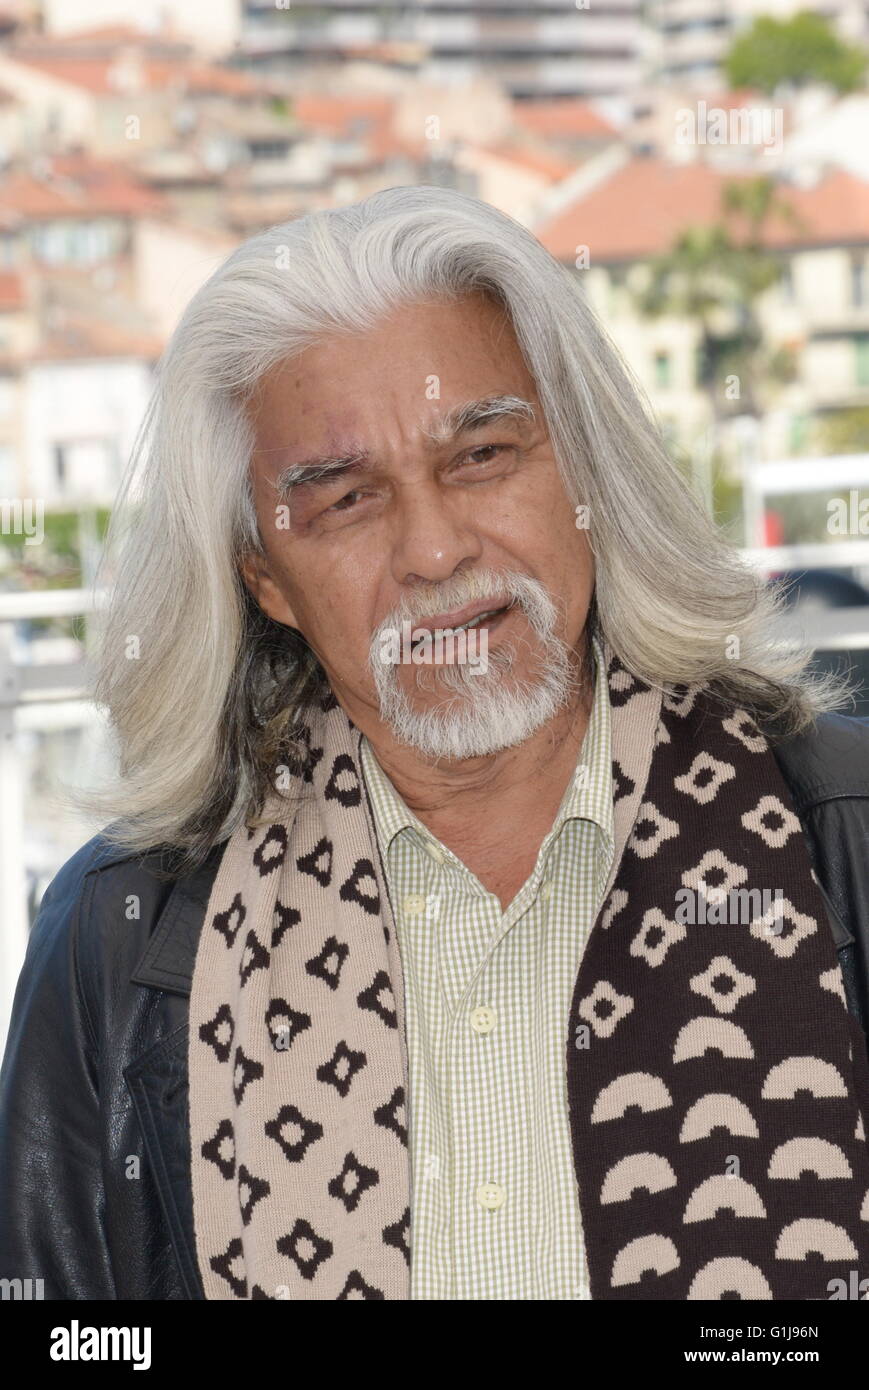 Cannes, France. 11th May, 2016. CANNES, FRANCE - MAY 16: Actor Wan Hanafi Su attends the 'Apprentice' Photocall during the annual 69th Cannes Film Festival at Palais des Festivals on May 16, 2016 in Cannes, France. © Frederick Injimbert/ZUMA Wire/Alamy Live News Stock Photo